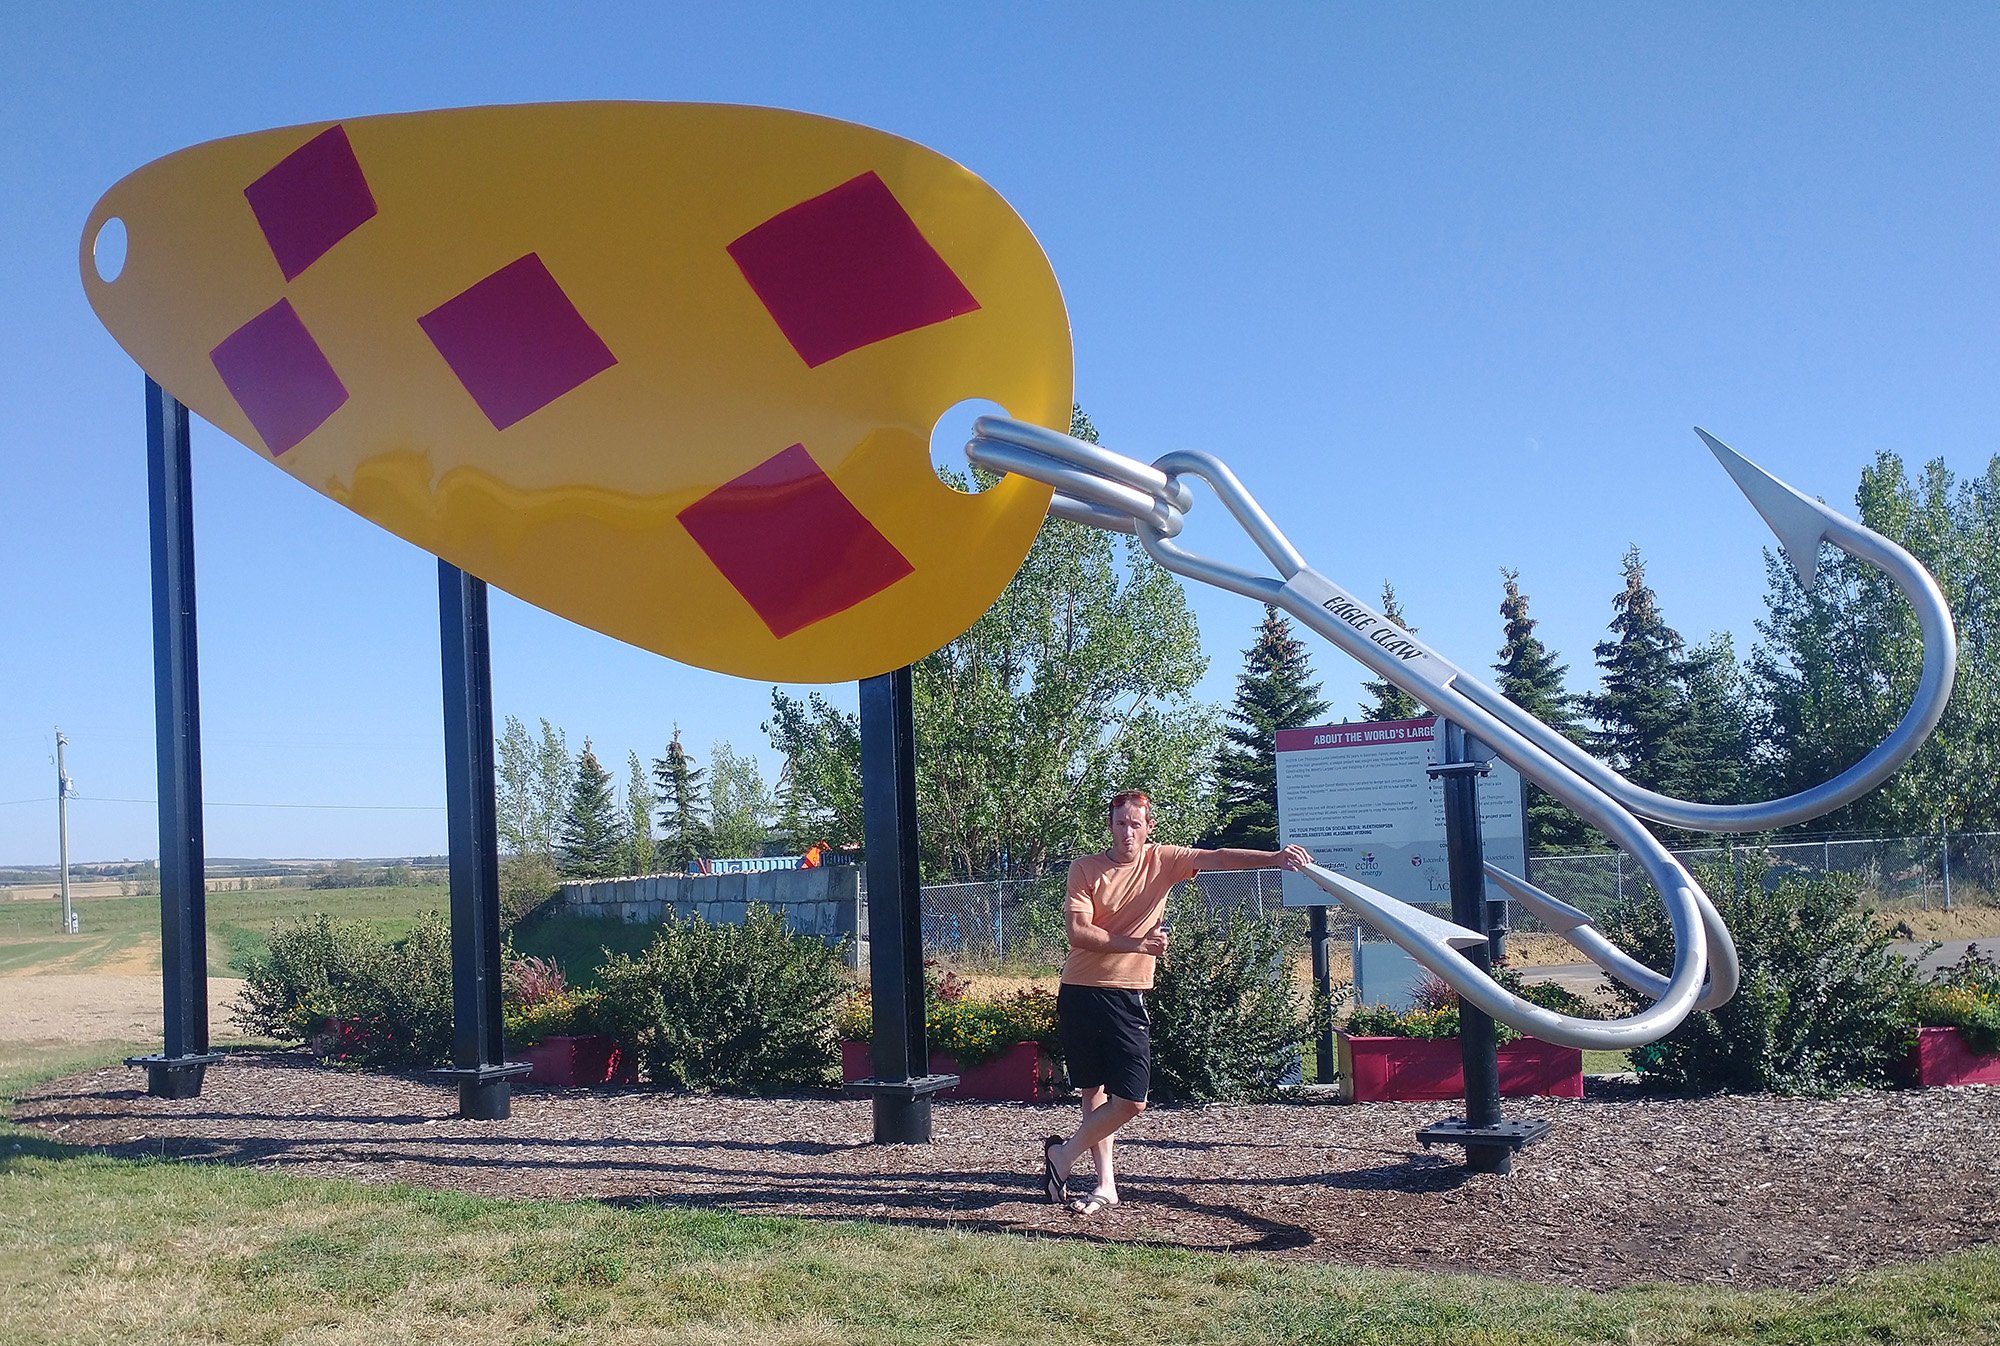 Biggest Fishing Lure, in Lacombe, AB. That one's nice and pristine, not rubbed to nothing by tourists.